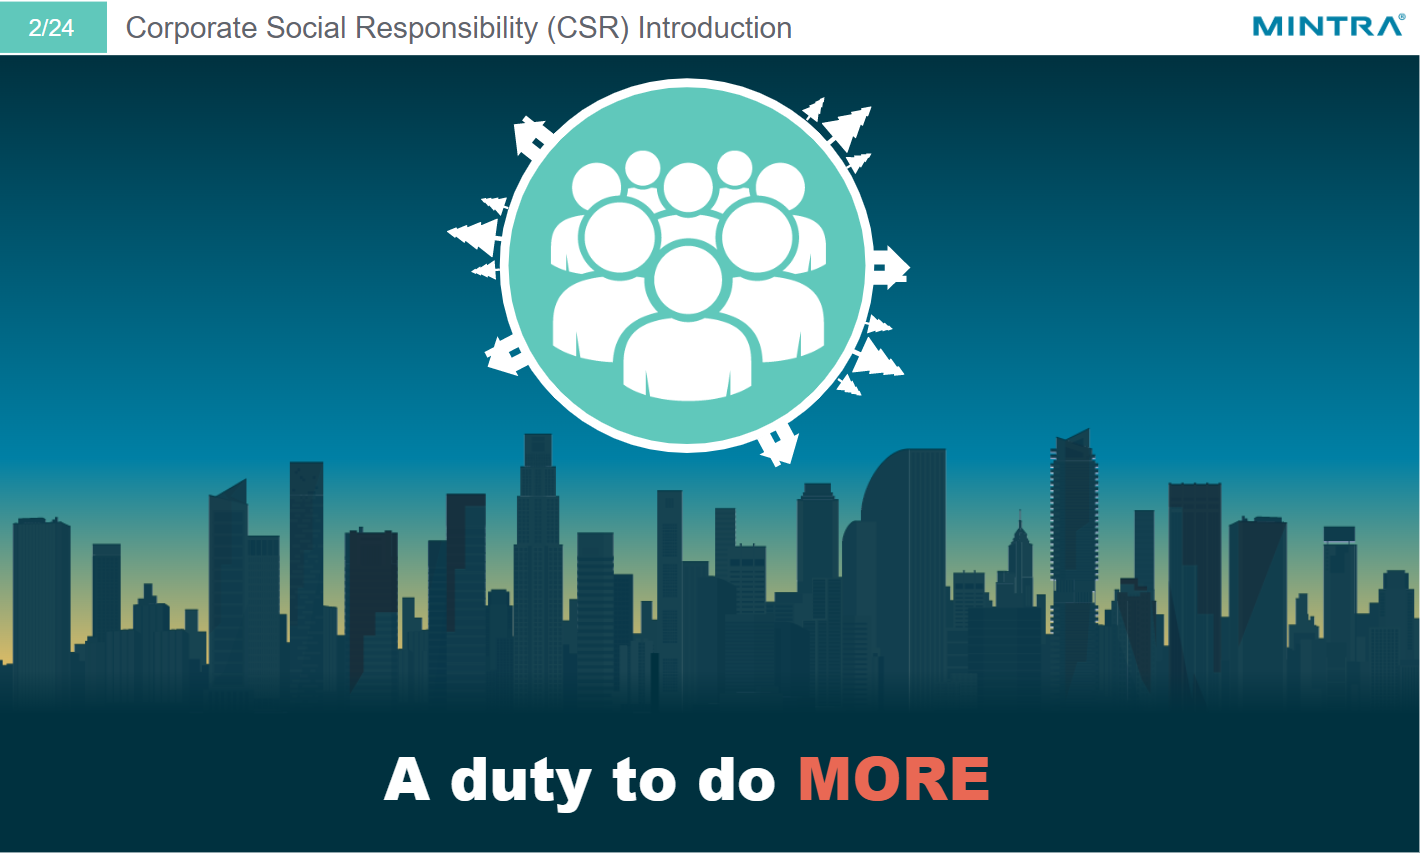 Corporate Social Responsibility and Climate Change 2